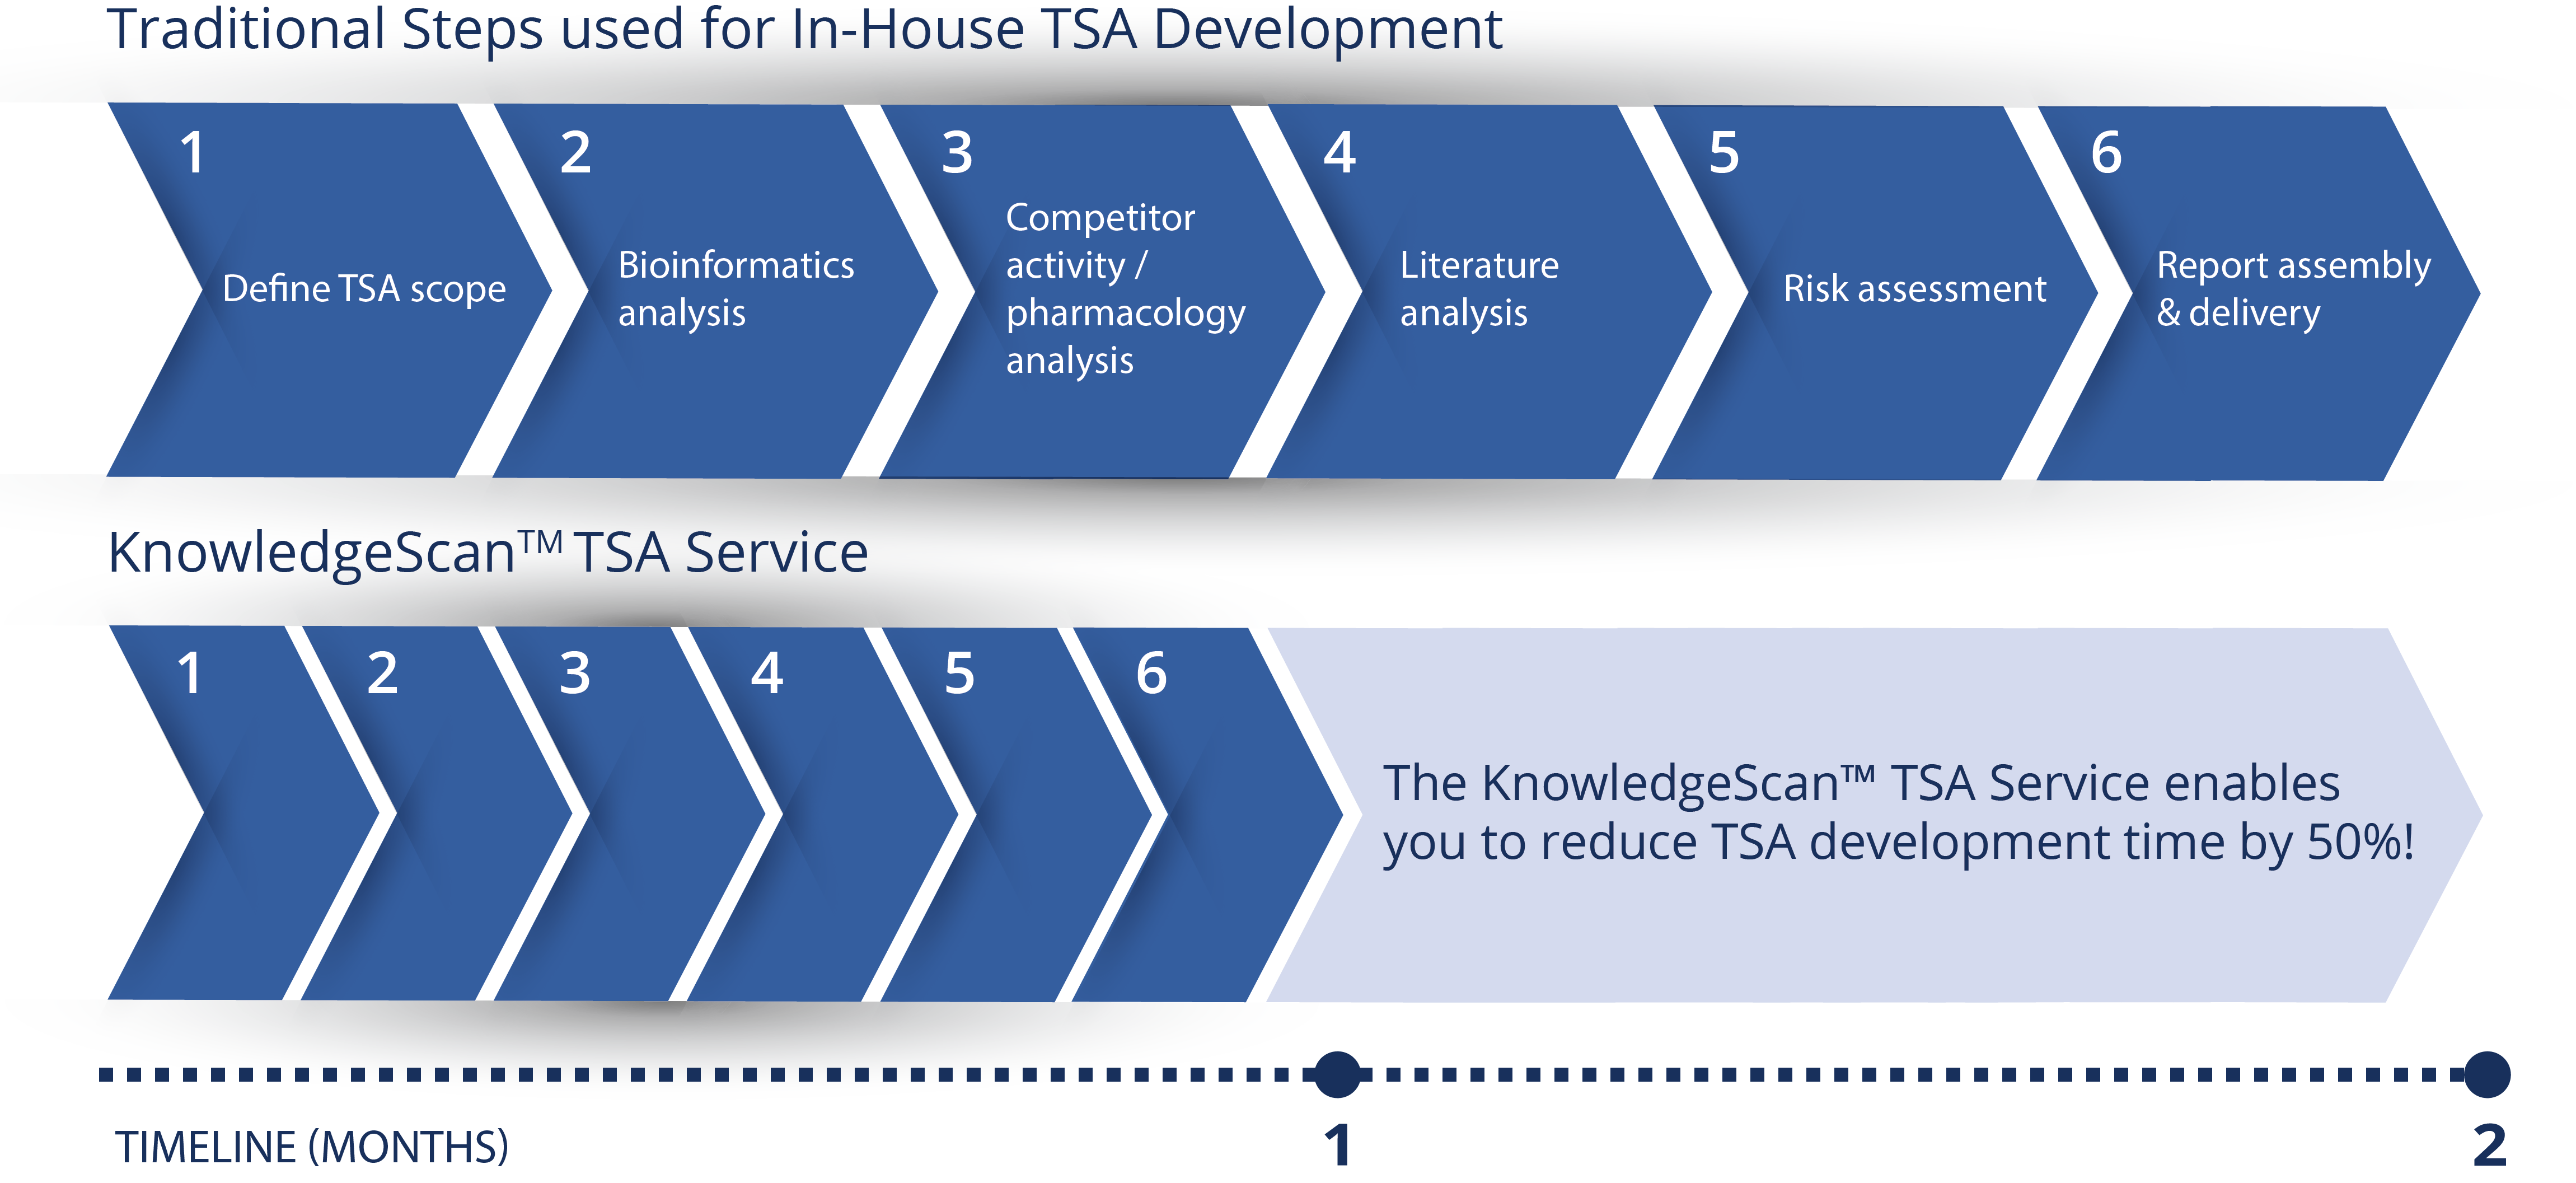 Diagram showing how KnowledgeScan can reduce the traditional costs of TSA development by up to 50%